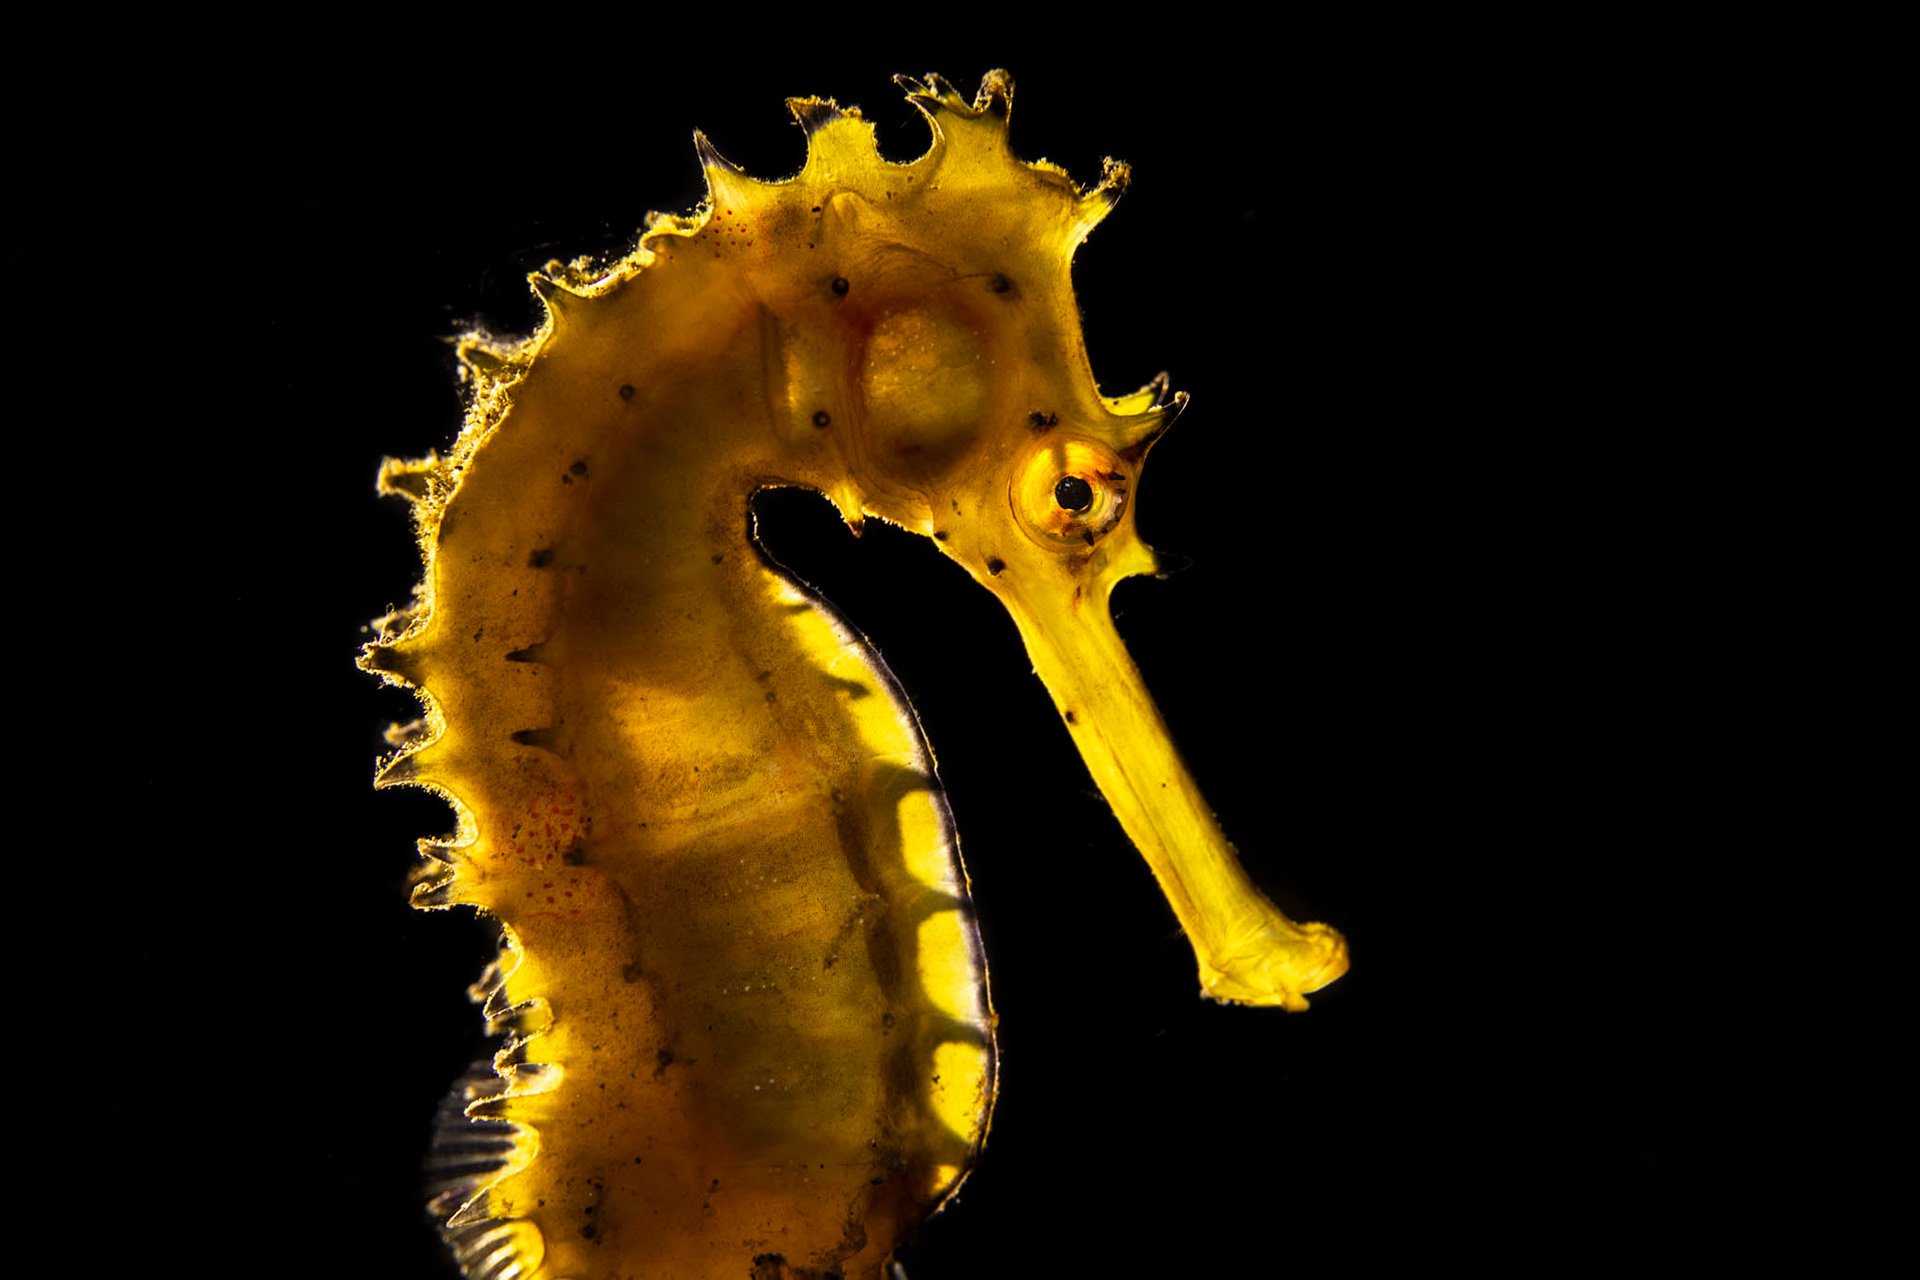 Tobias Friedrich's Old Canon DSLR Captures Critters of the Deep Seas